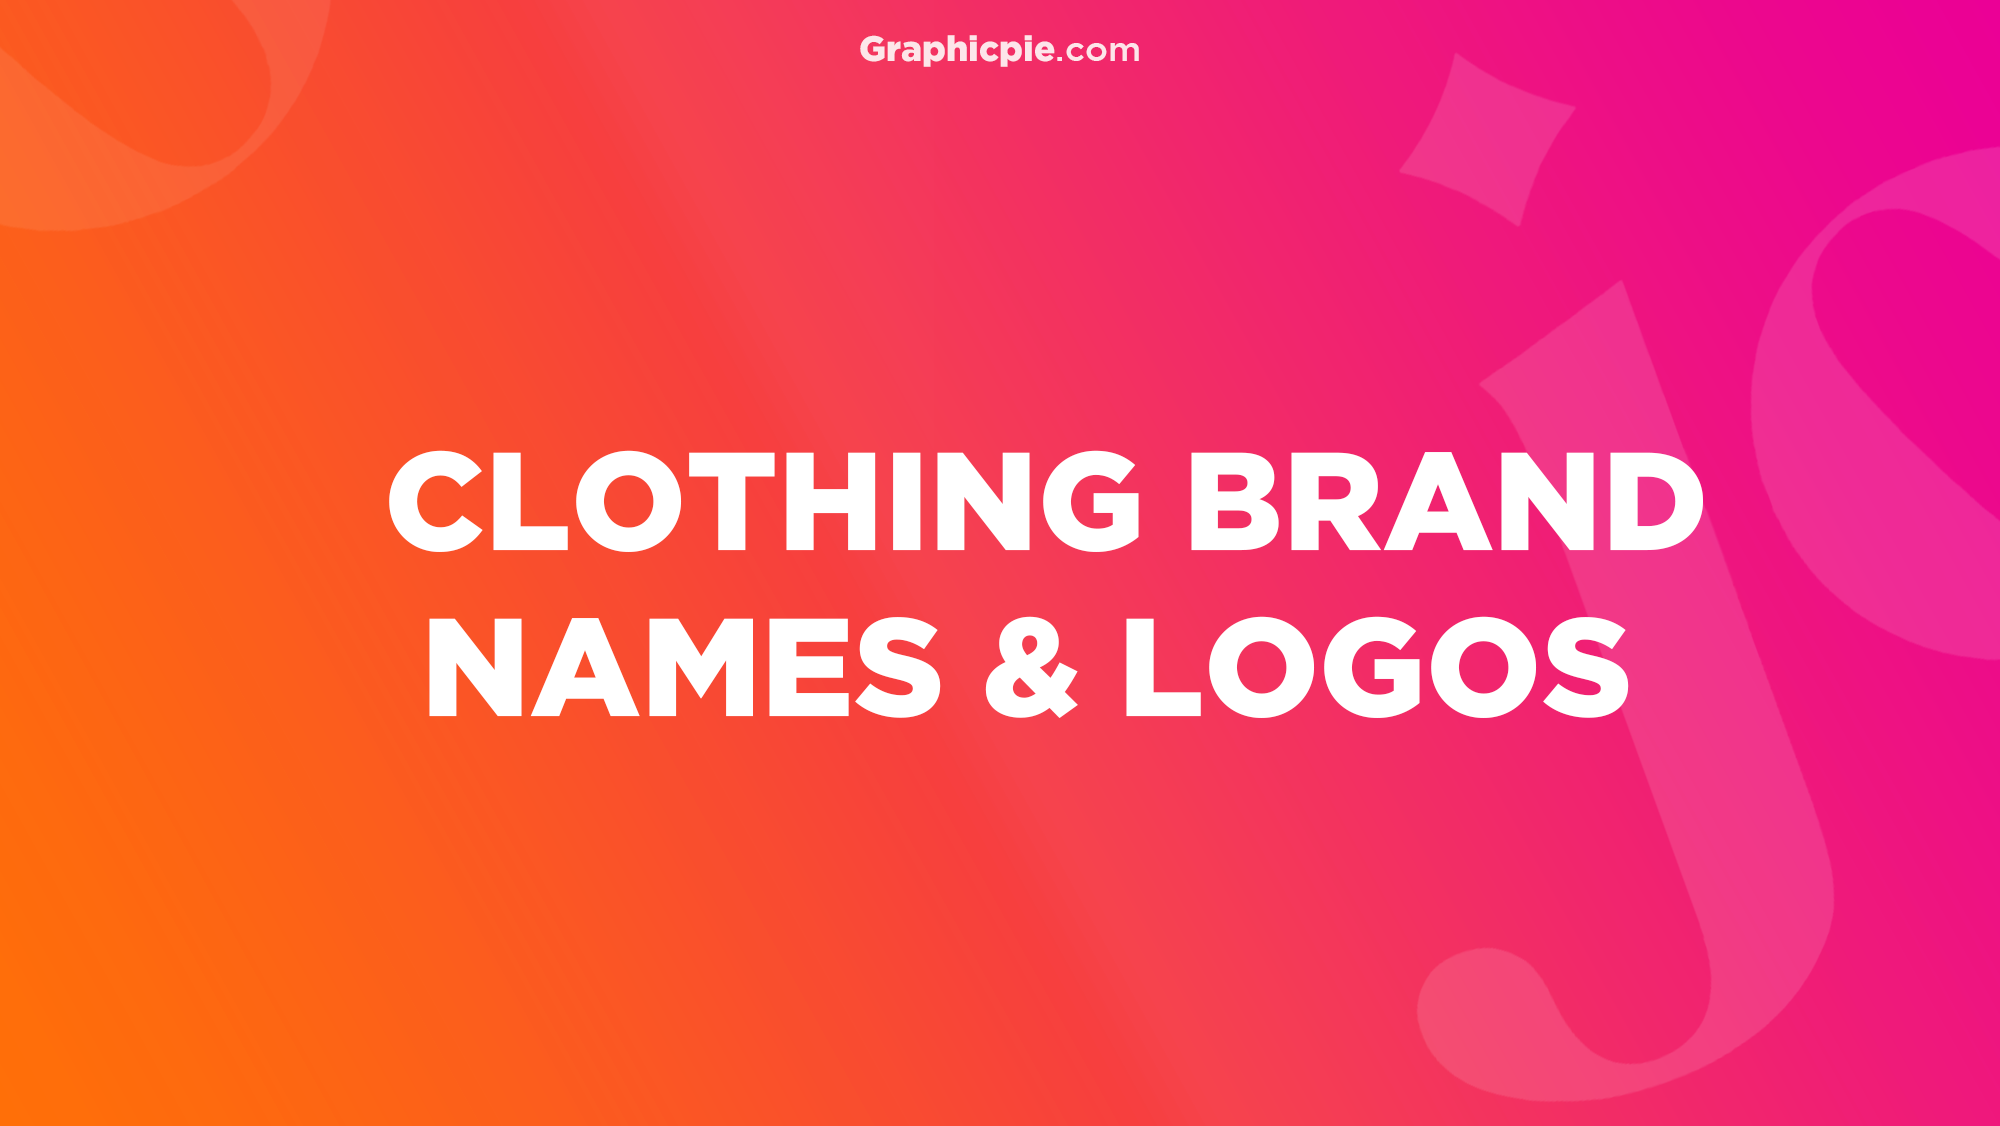 clothing-brand-names-and-logos-2023-graphic-pie